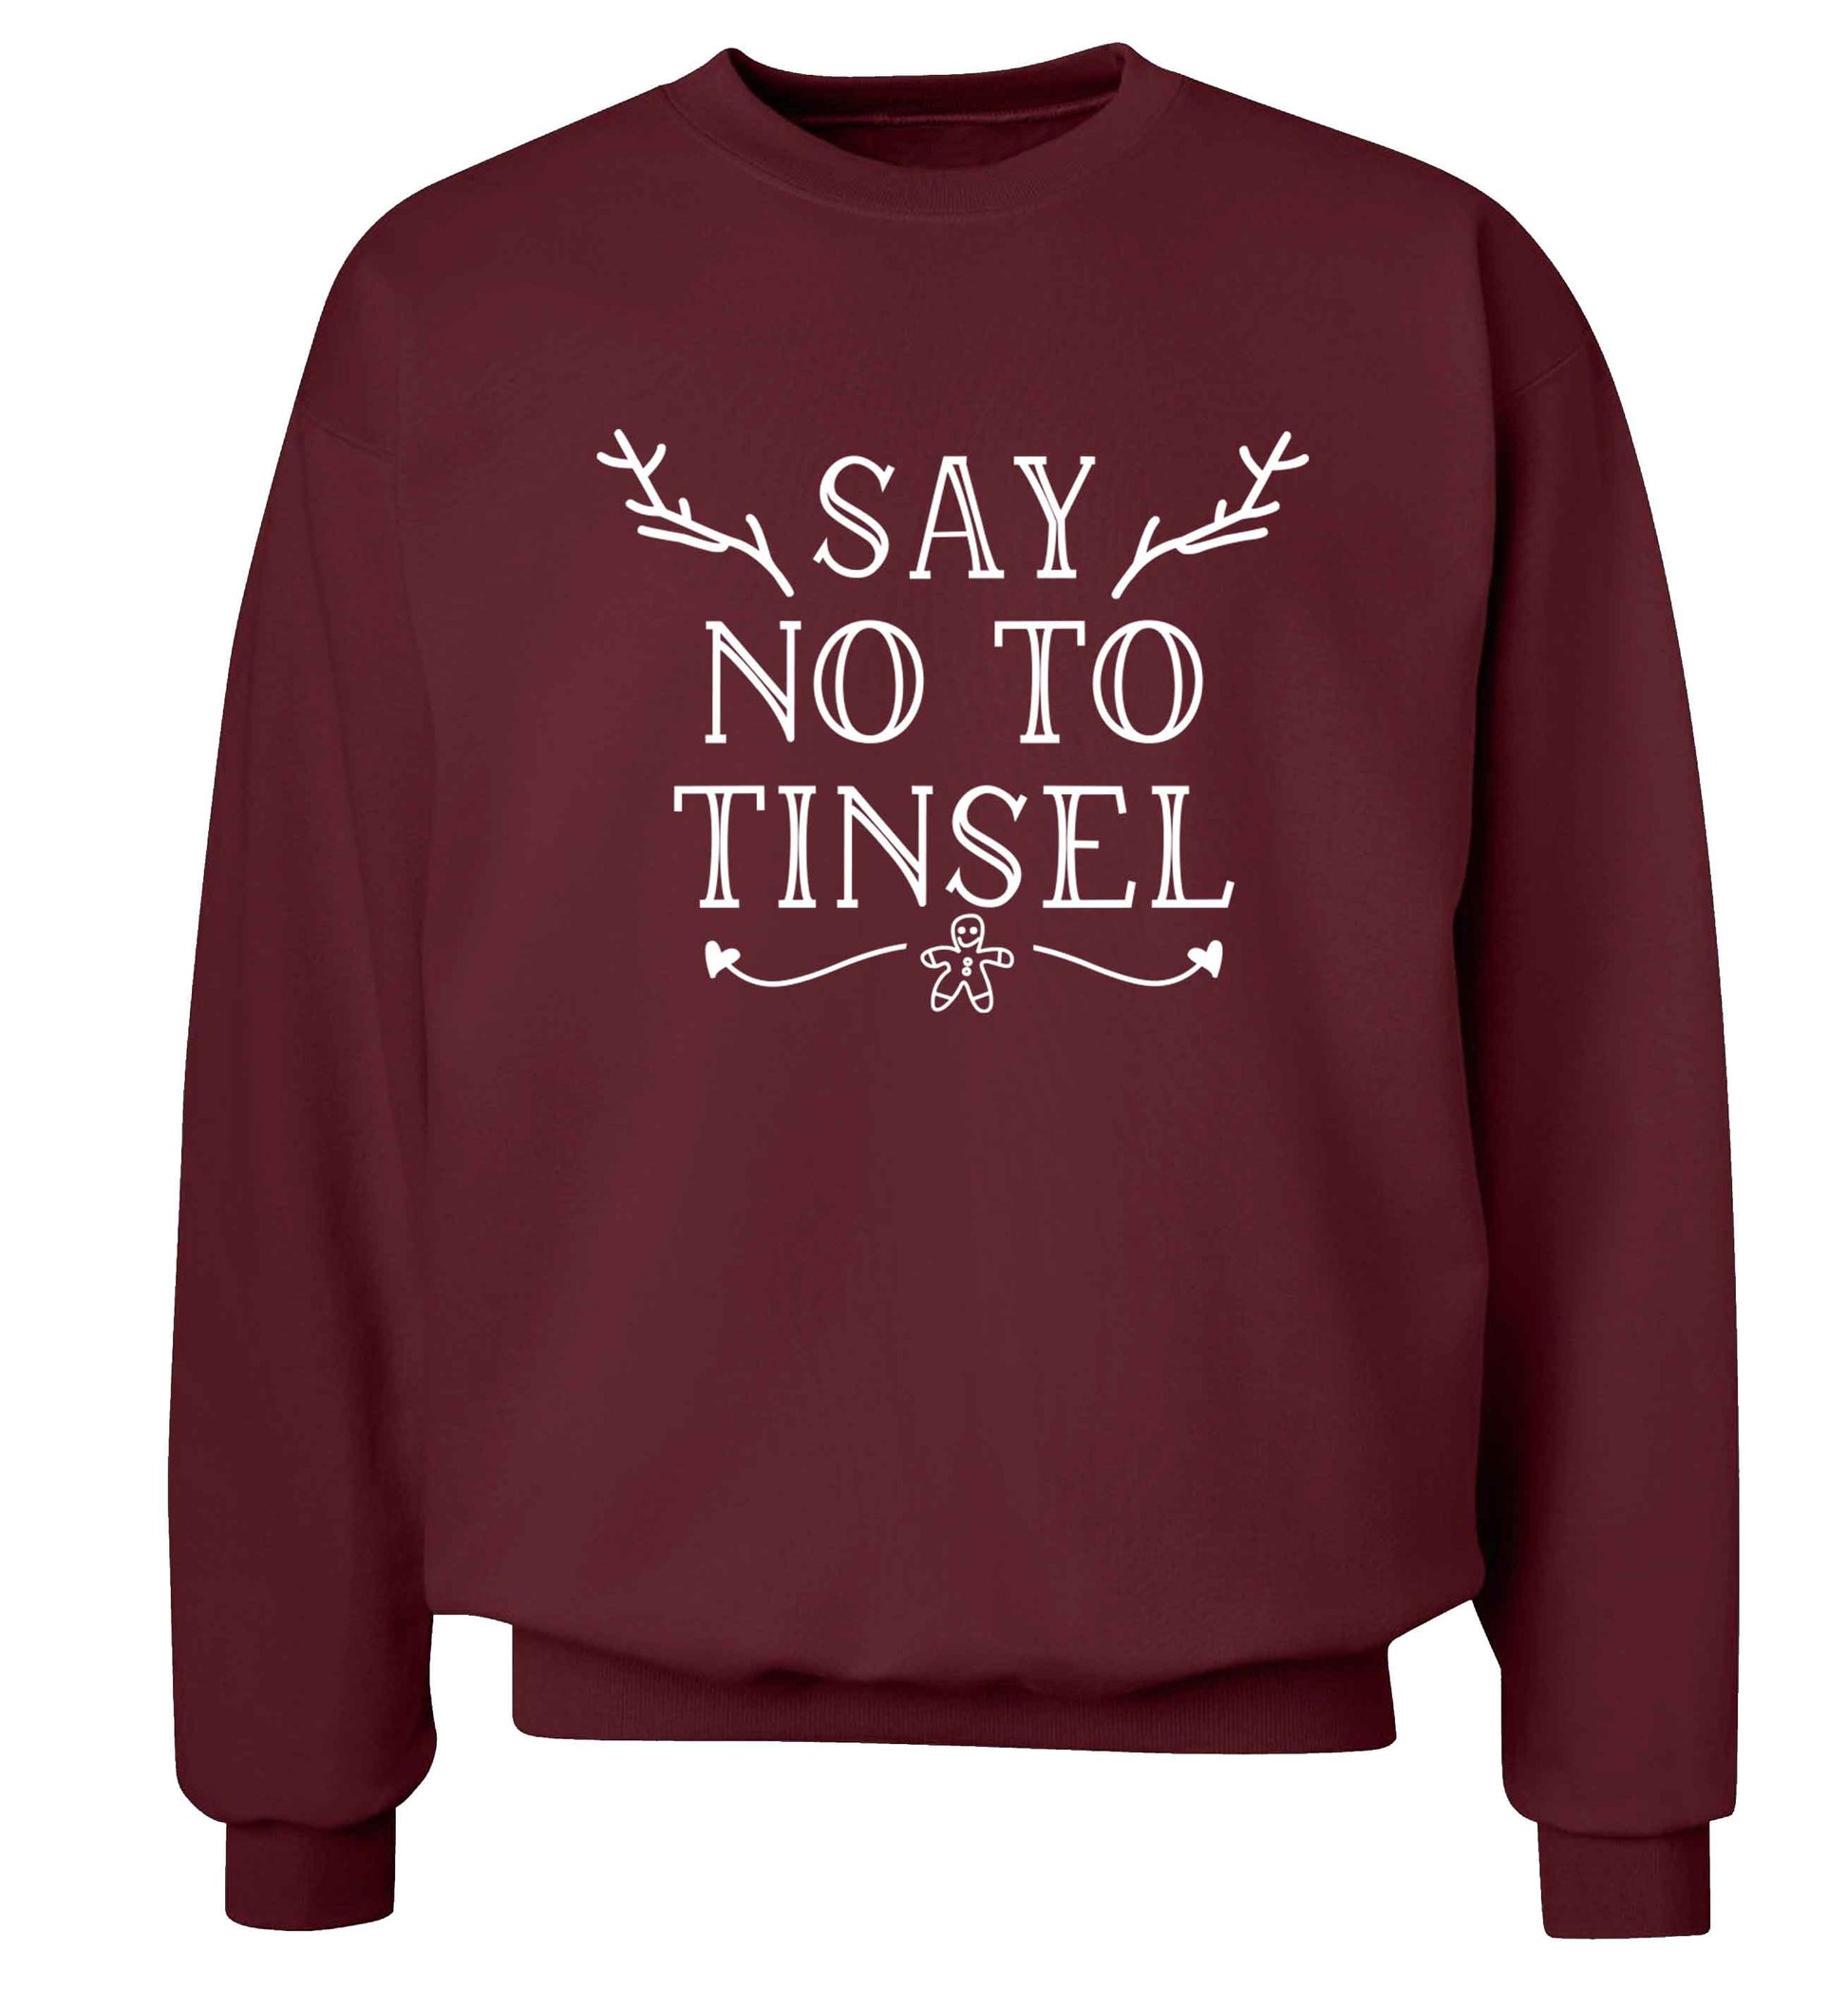 Say no to tinsel Adult's unisex maroon Sweater 2XL